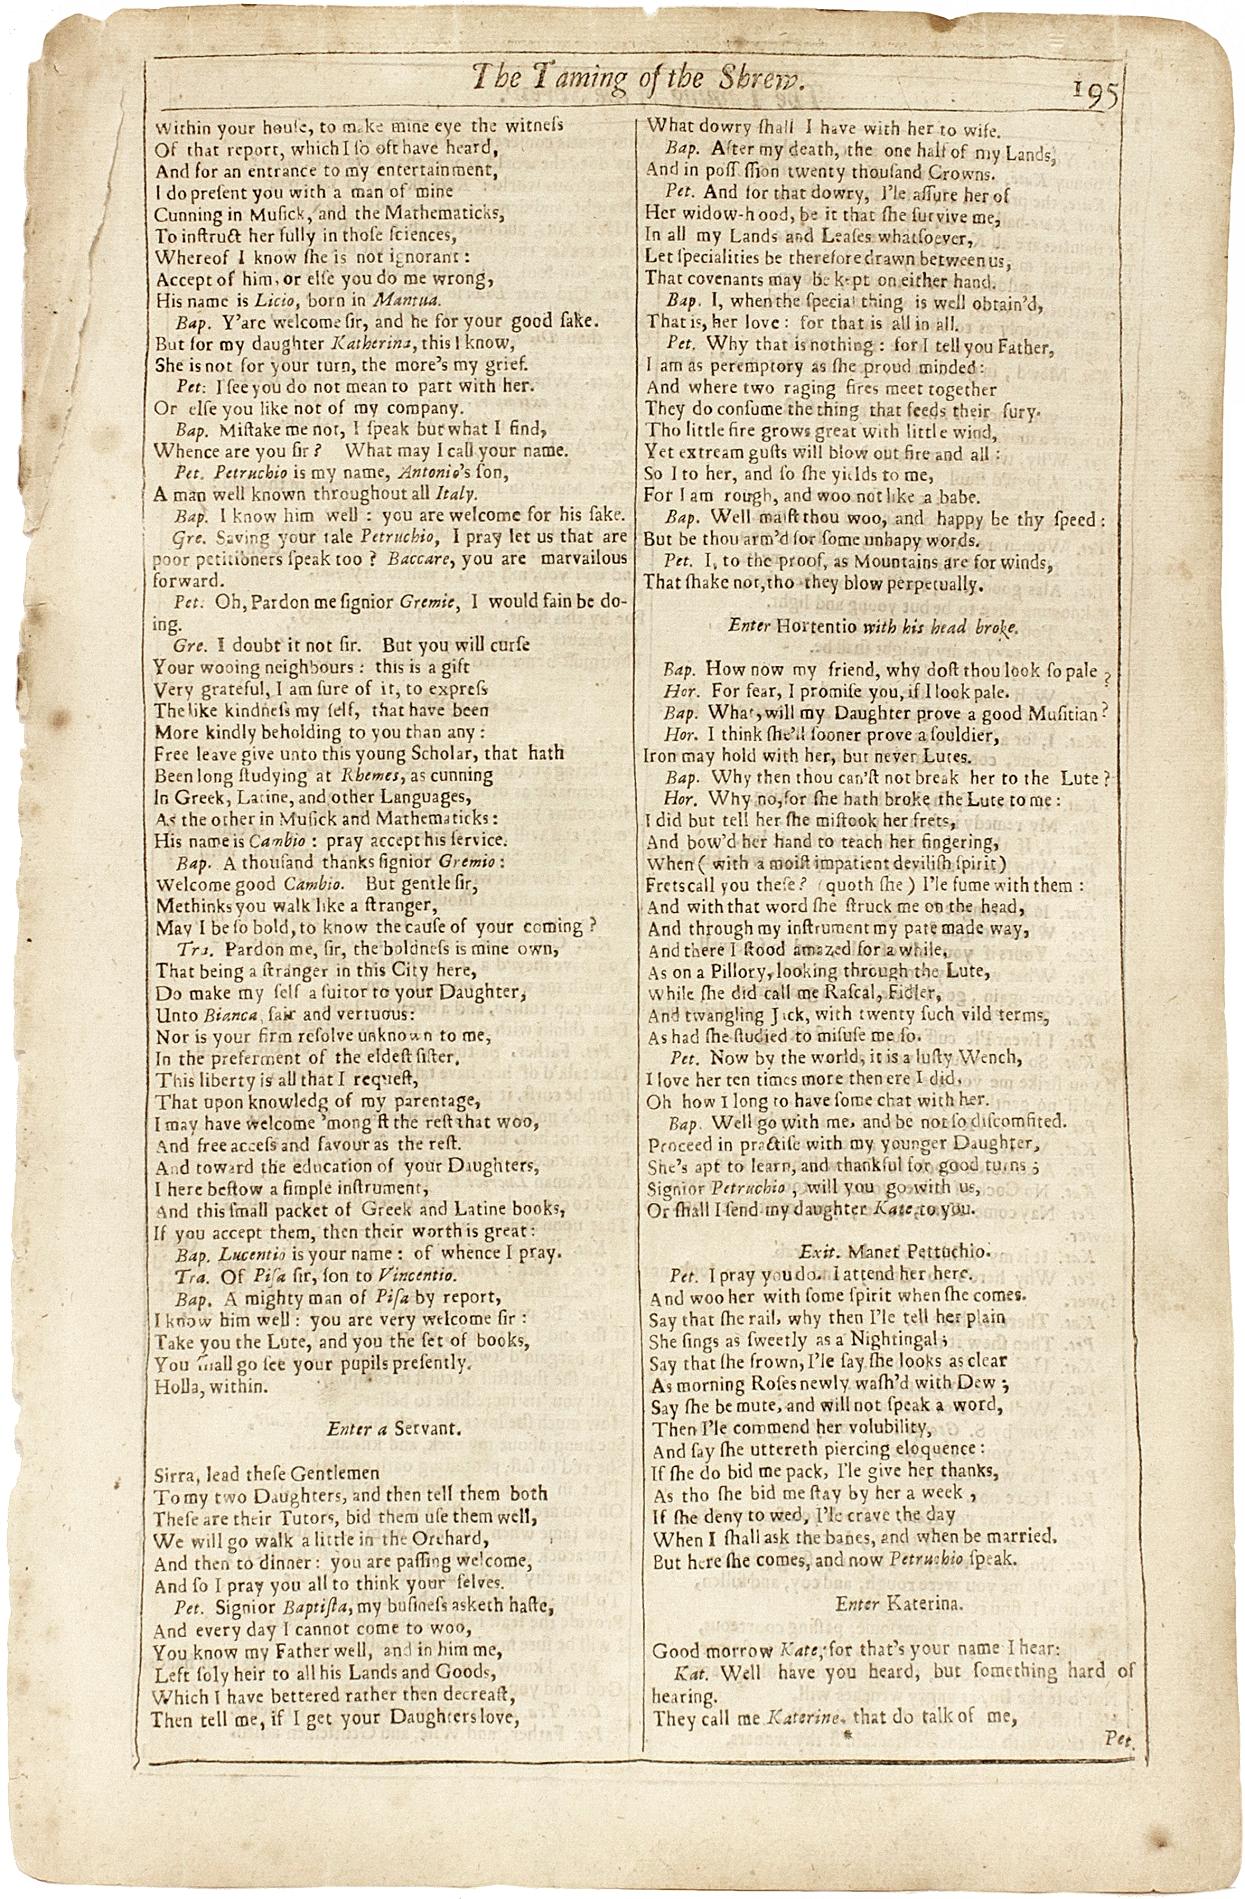 AUTHOR: SHAKESPEARE, William. 

TITLE: The Works of William Shakespeare. (The Taming of the Shrew) - page 195-196.

PUBLISHER: London: Printed for H. Herringman, E. Brewster and R. Bentley, 1685.

DESCRIPTION: THE FOURTH FOLIO. 195-196p., 1 leaf